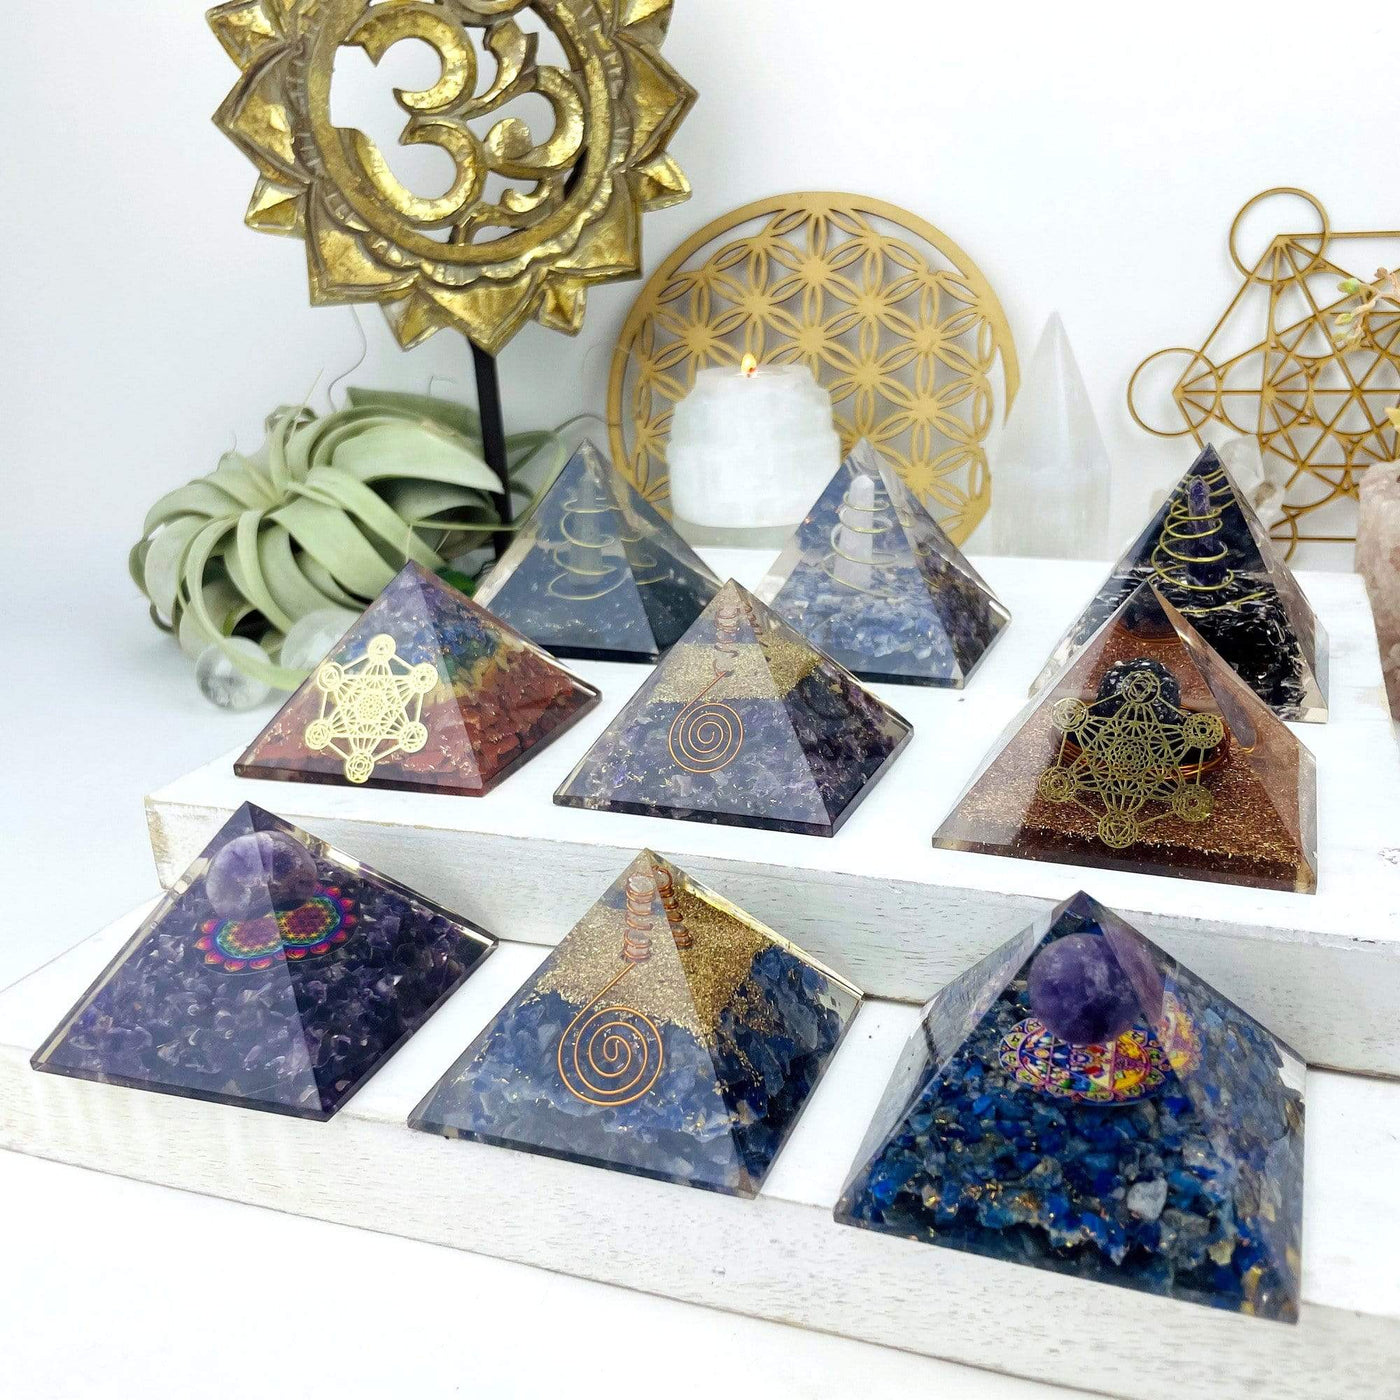 all the different orgone pyramids available on a shelf